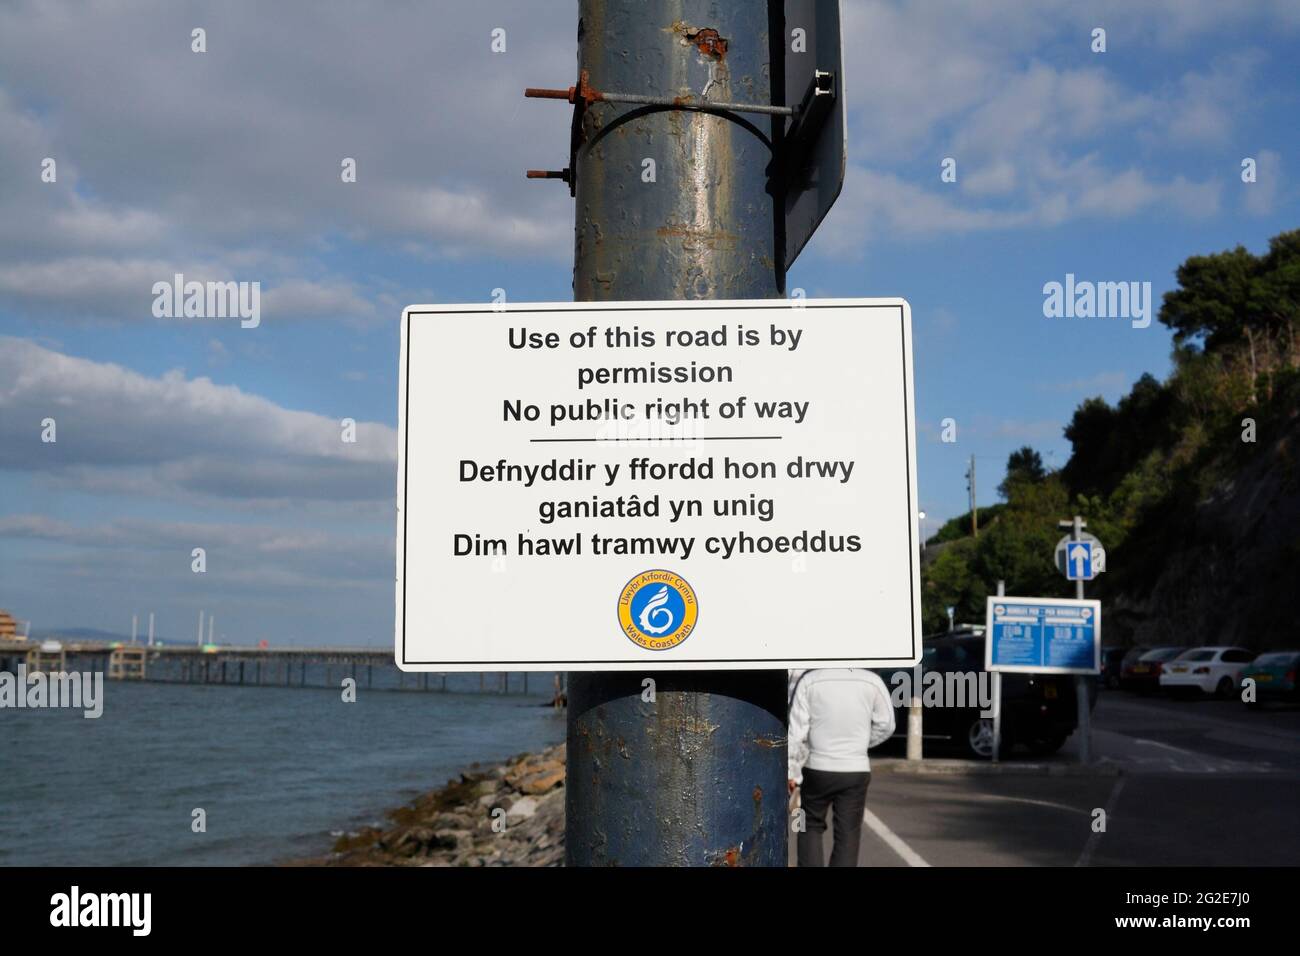 No public right of way sign, in English and Welsh, Mumbles Swansea Wales UK, Wales coast path, coastline Stock Photo